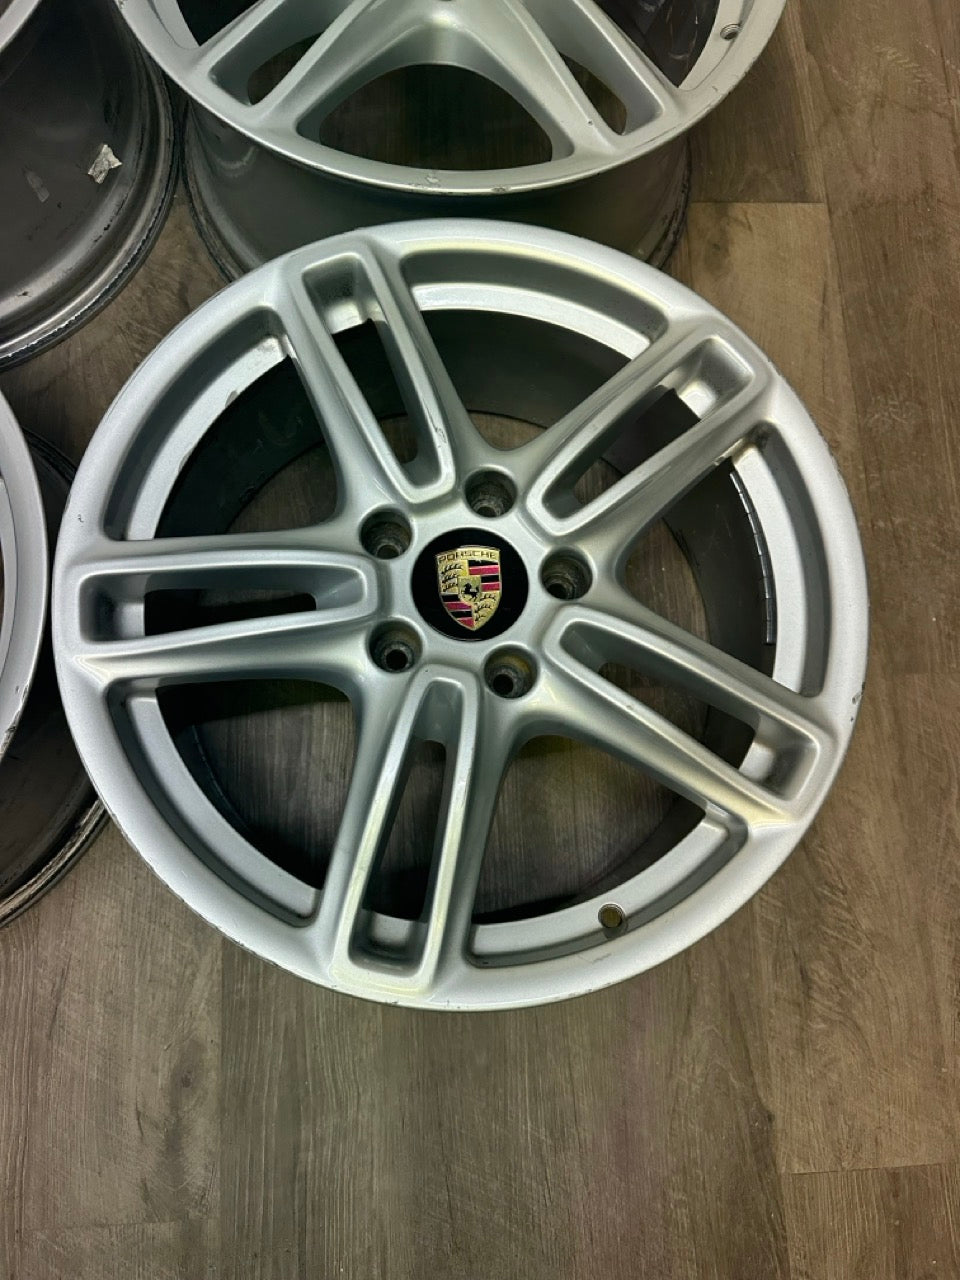 19x9 19x10 Porsche OEM Staggered Rims 5x130 (Used)